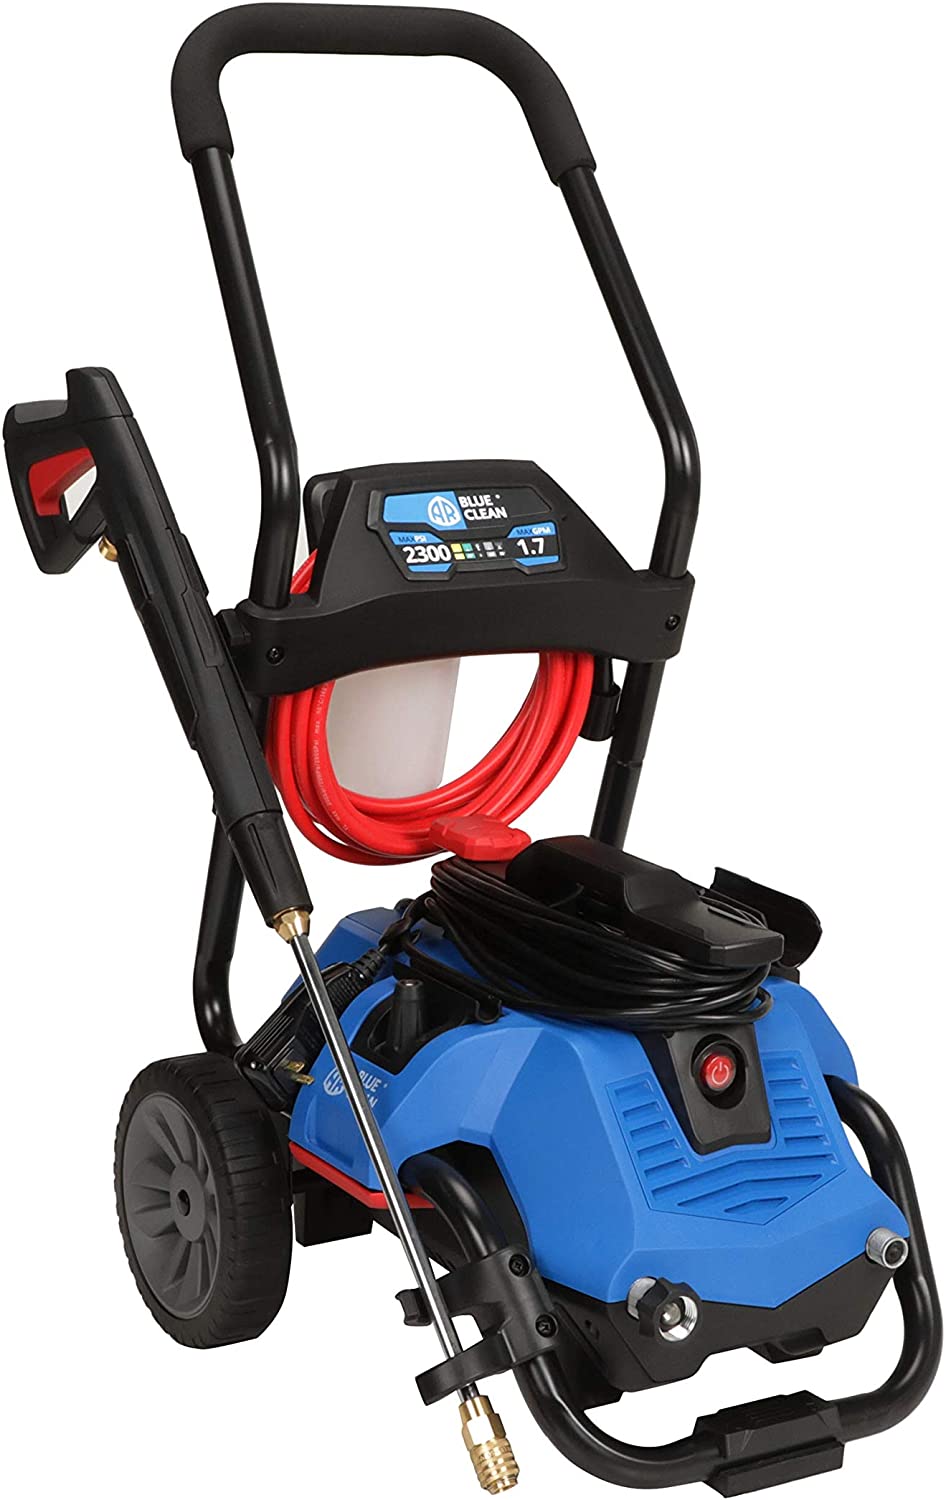 AR Blue Clean BC2N1HSS Pressure Washer Product Image